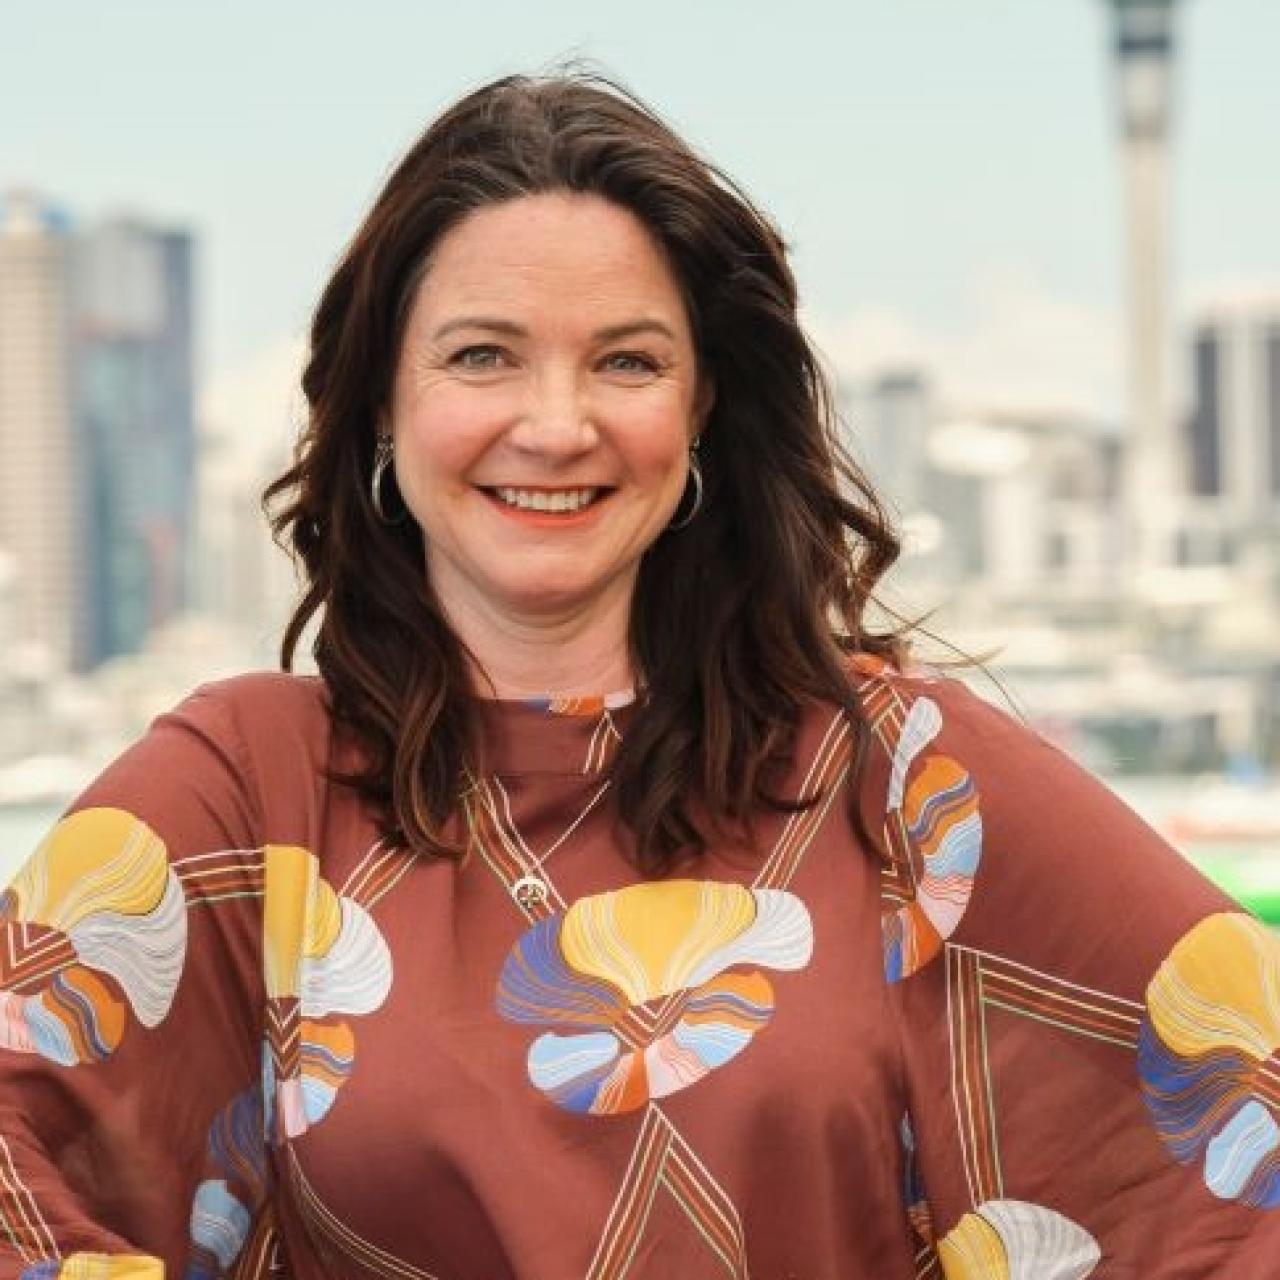 Renowned Kiwi actress joins MG in brand ambassador role as marque’s celebration of Life commences